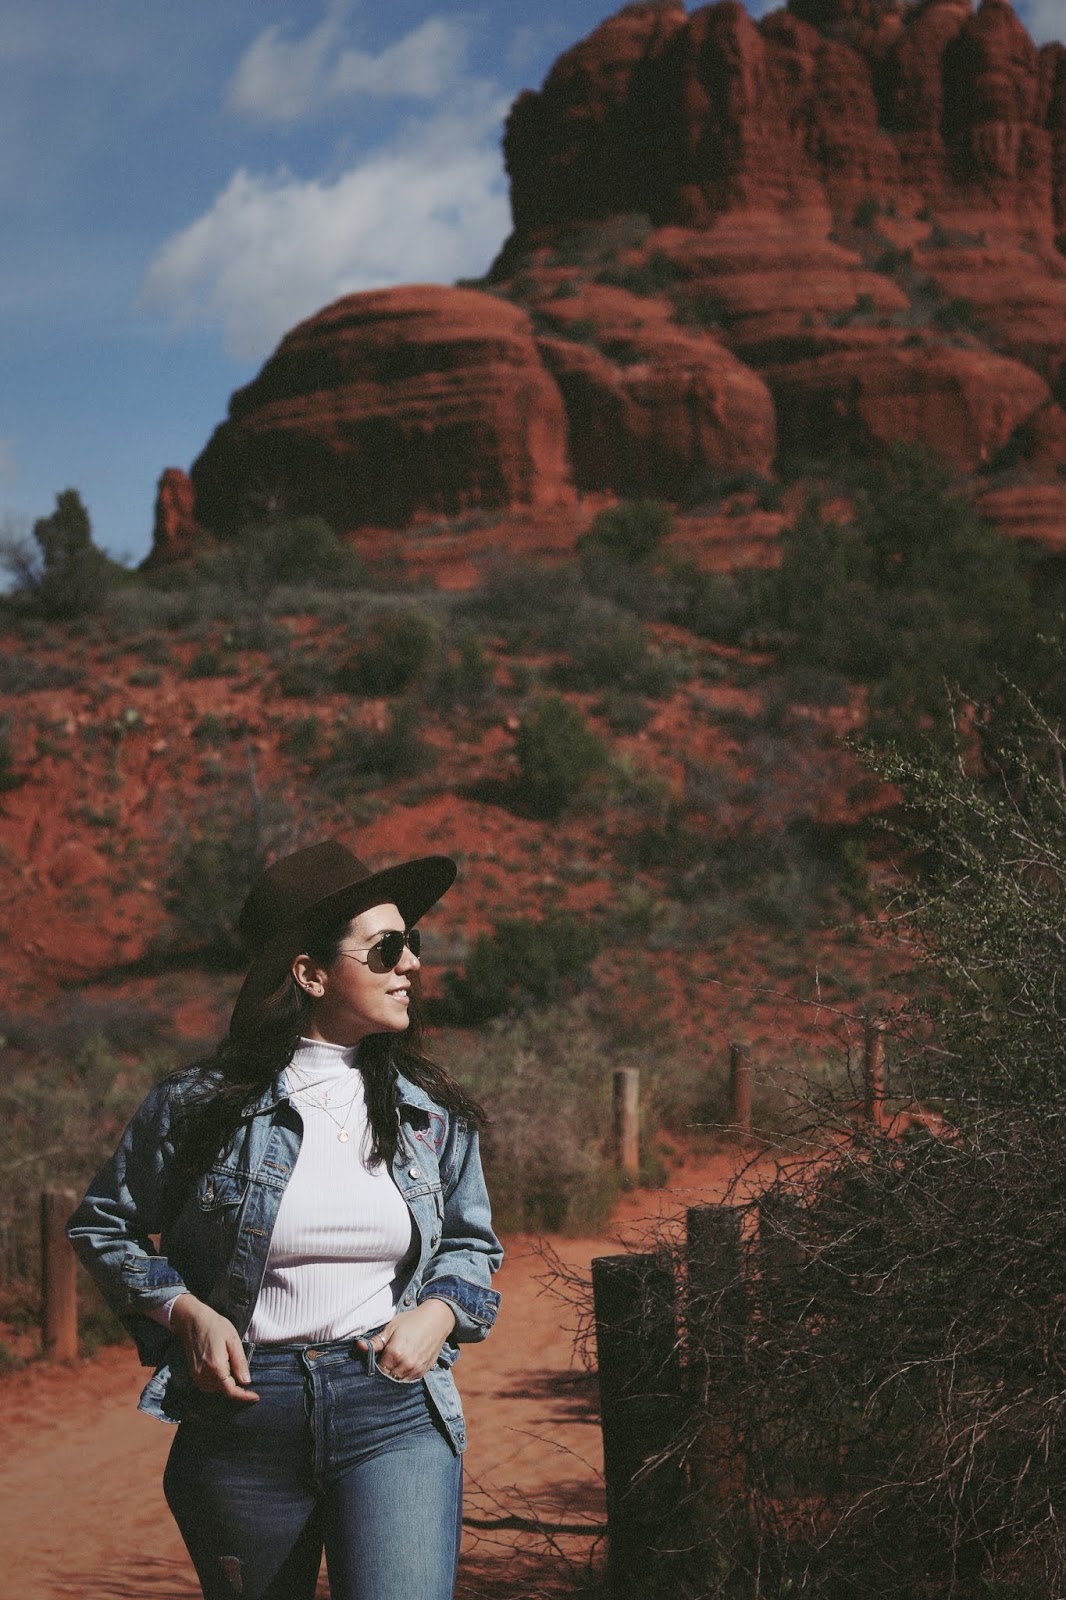 denim on denim outfit brunette the label jacket lack of color rancher hat mother jeans Sedona Arizona travel diary bell rock